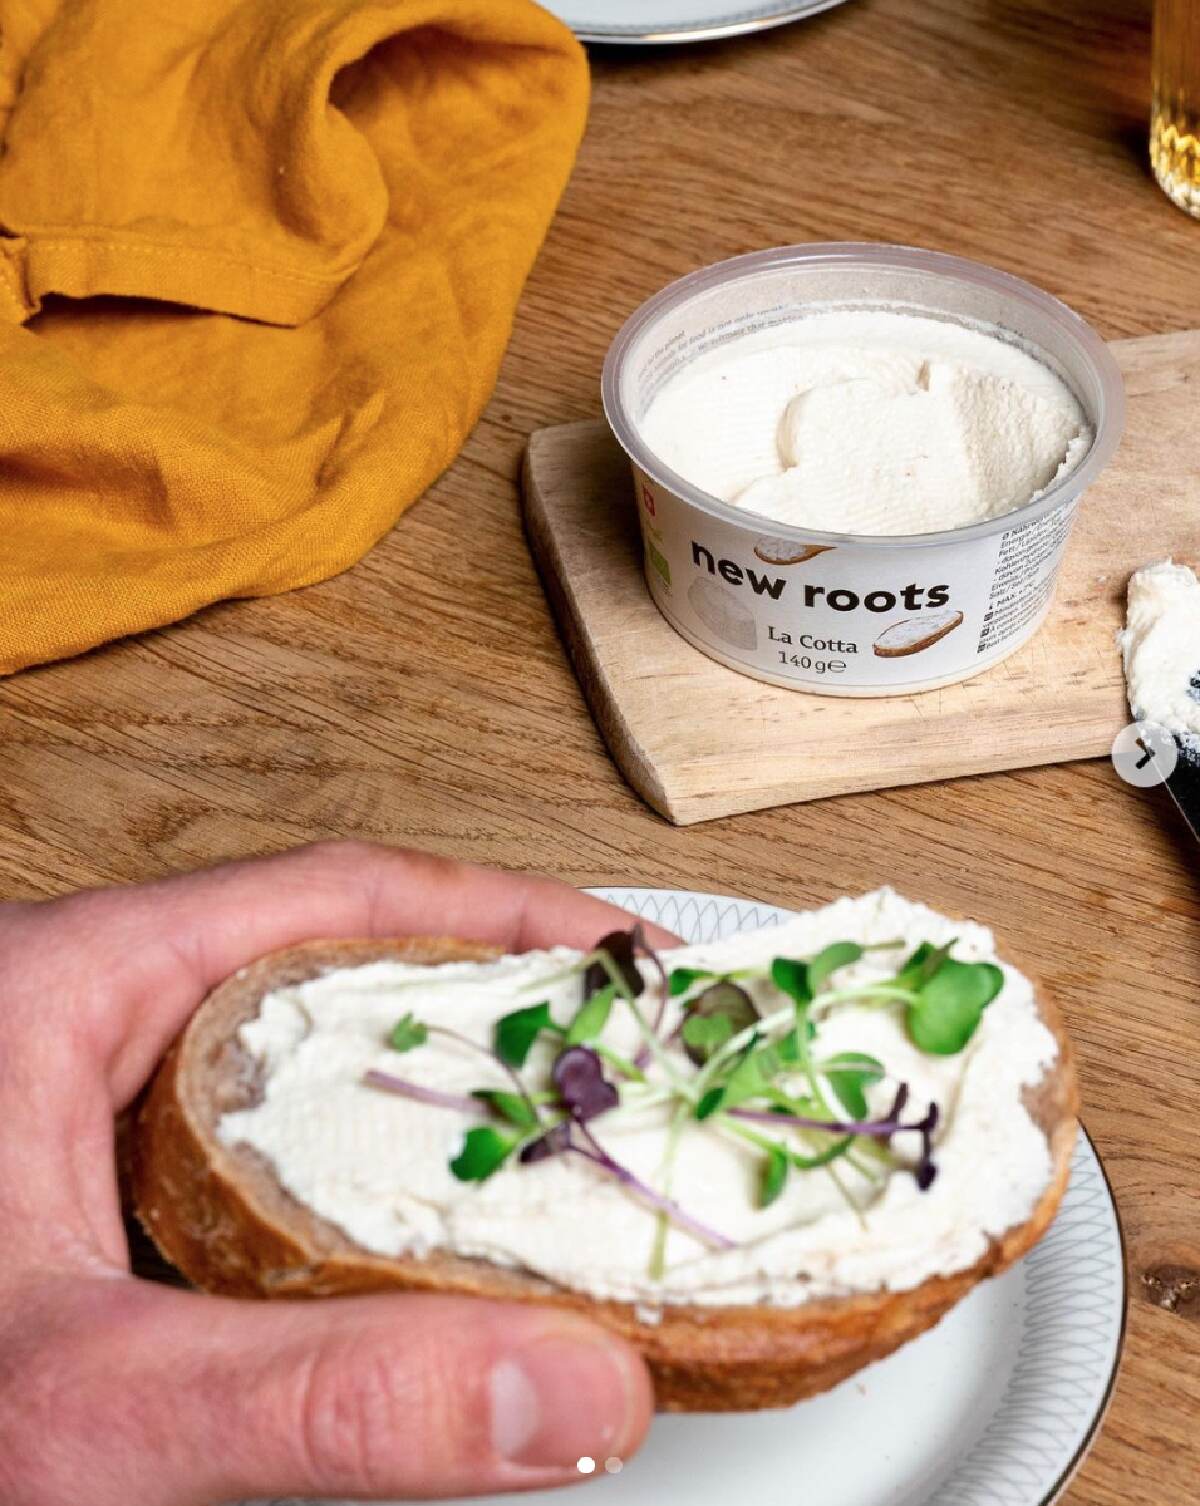 A hand holding a slice of bread covered in New Roots La Cotta cheese with sprouts. A plastic container of New Roots cheese is on a wooden cutting board nearby and an orange napkin against a wooden table background. 